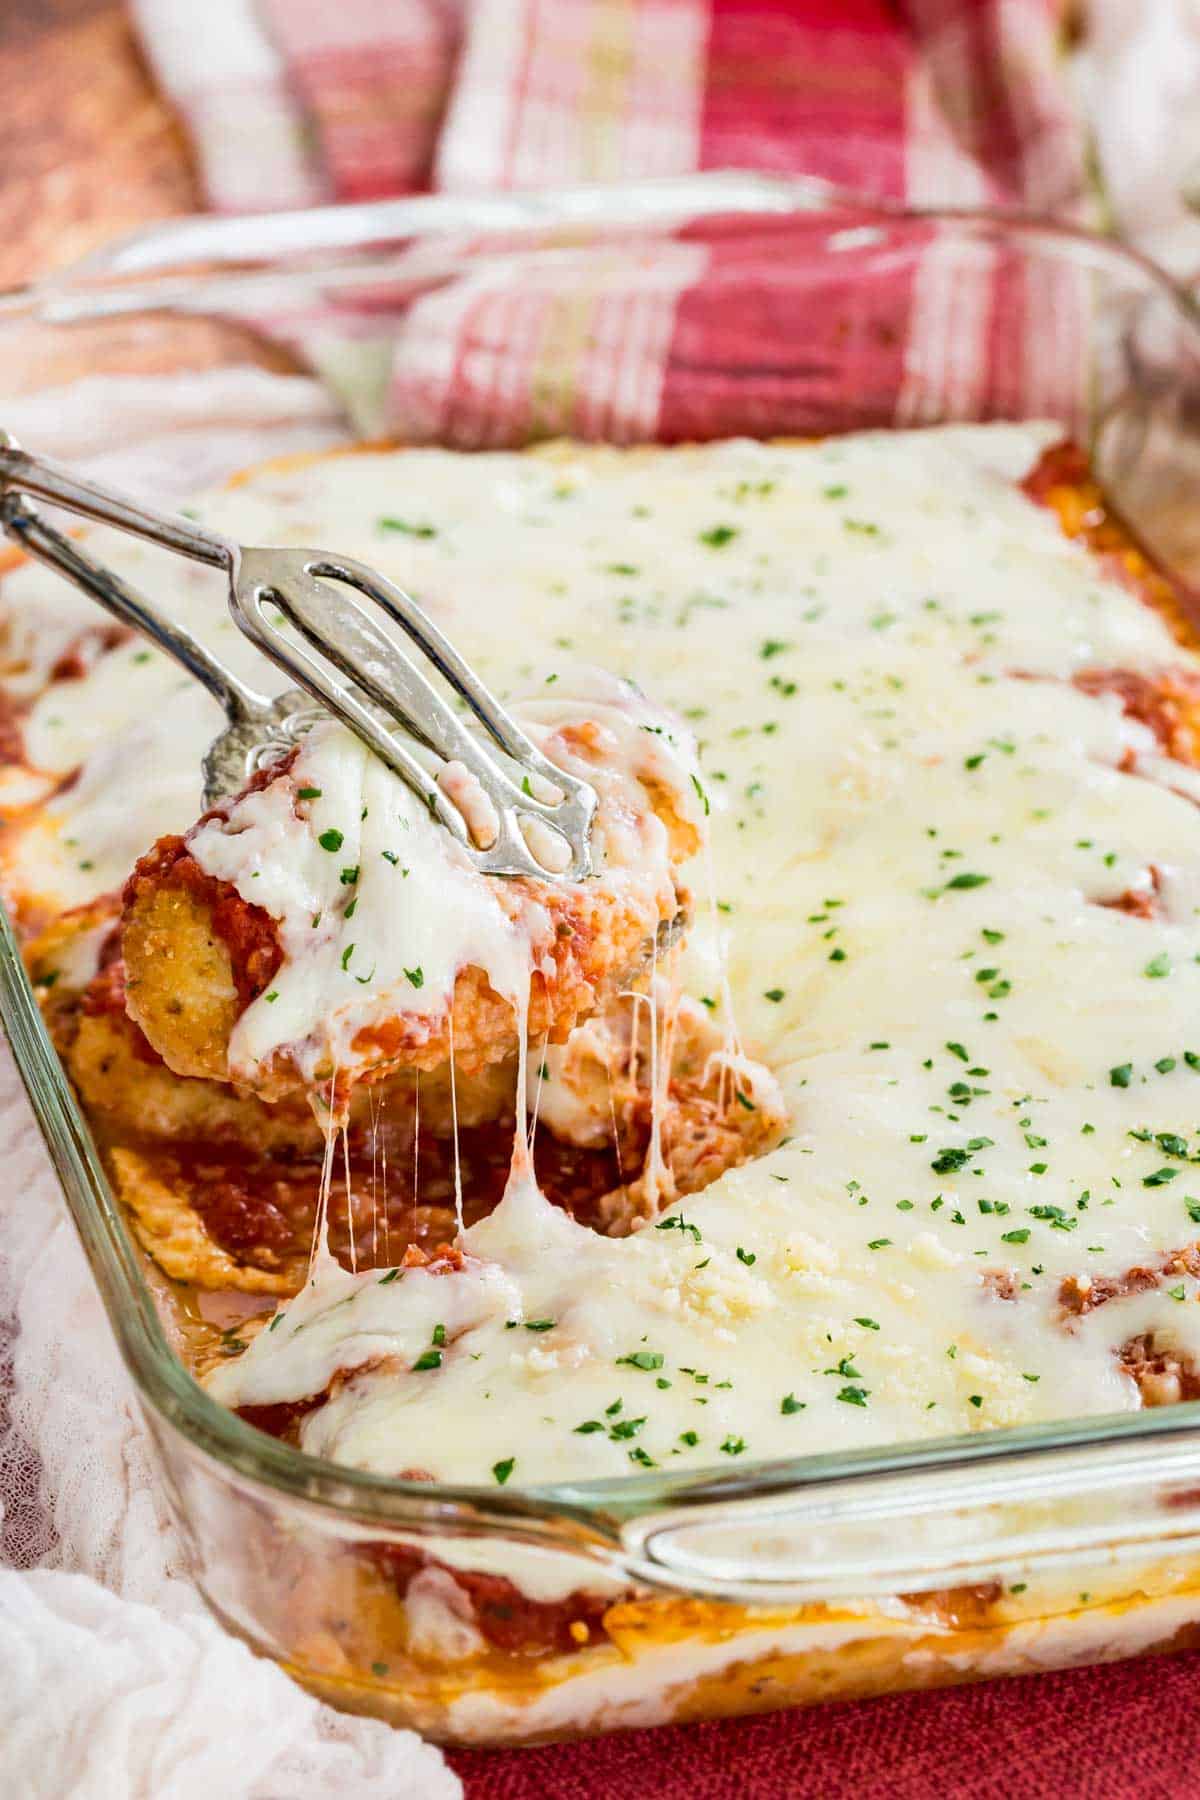 A piece of baked chicken is lifted from a glass casserole dish of cheesy chicken parmesan.